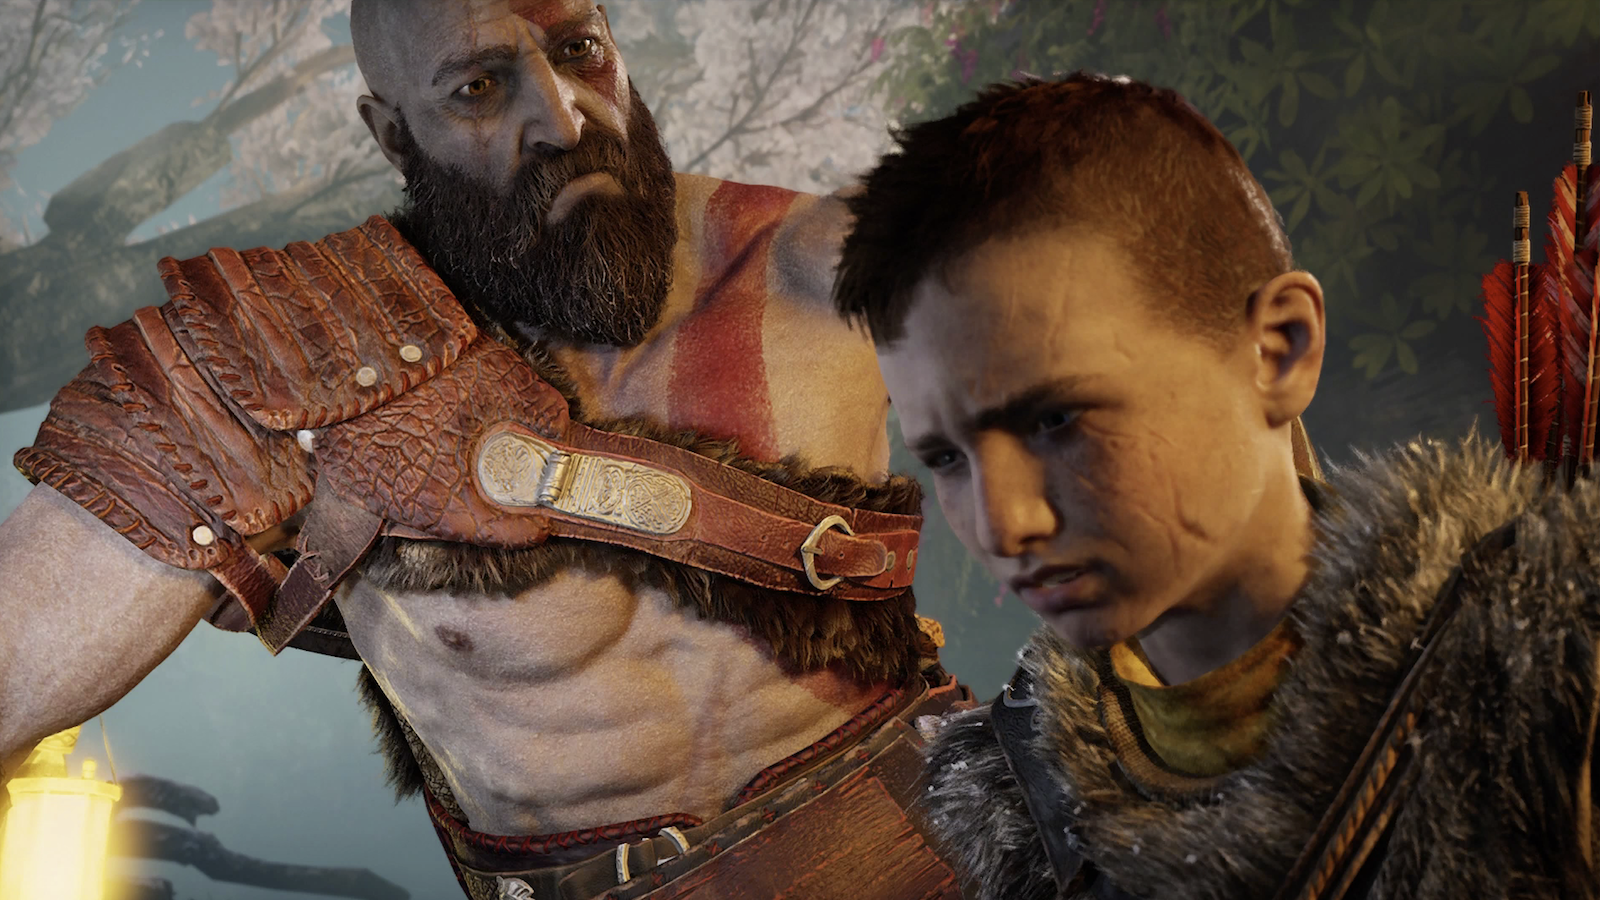 Is there a reason why Odin waited so long to confront Kratos and Atreus for  their actions in the first game? : r/GodofWar